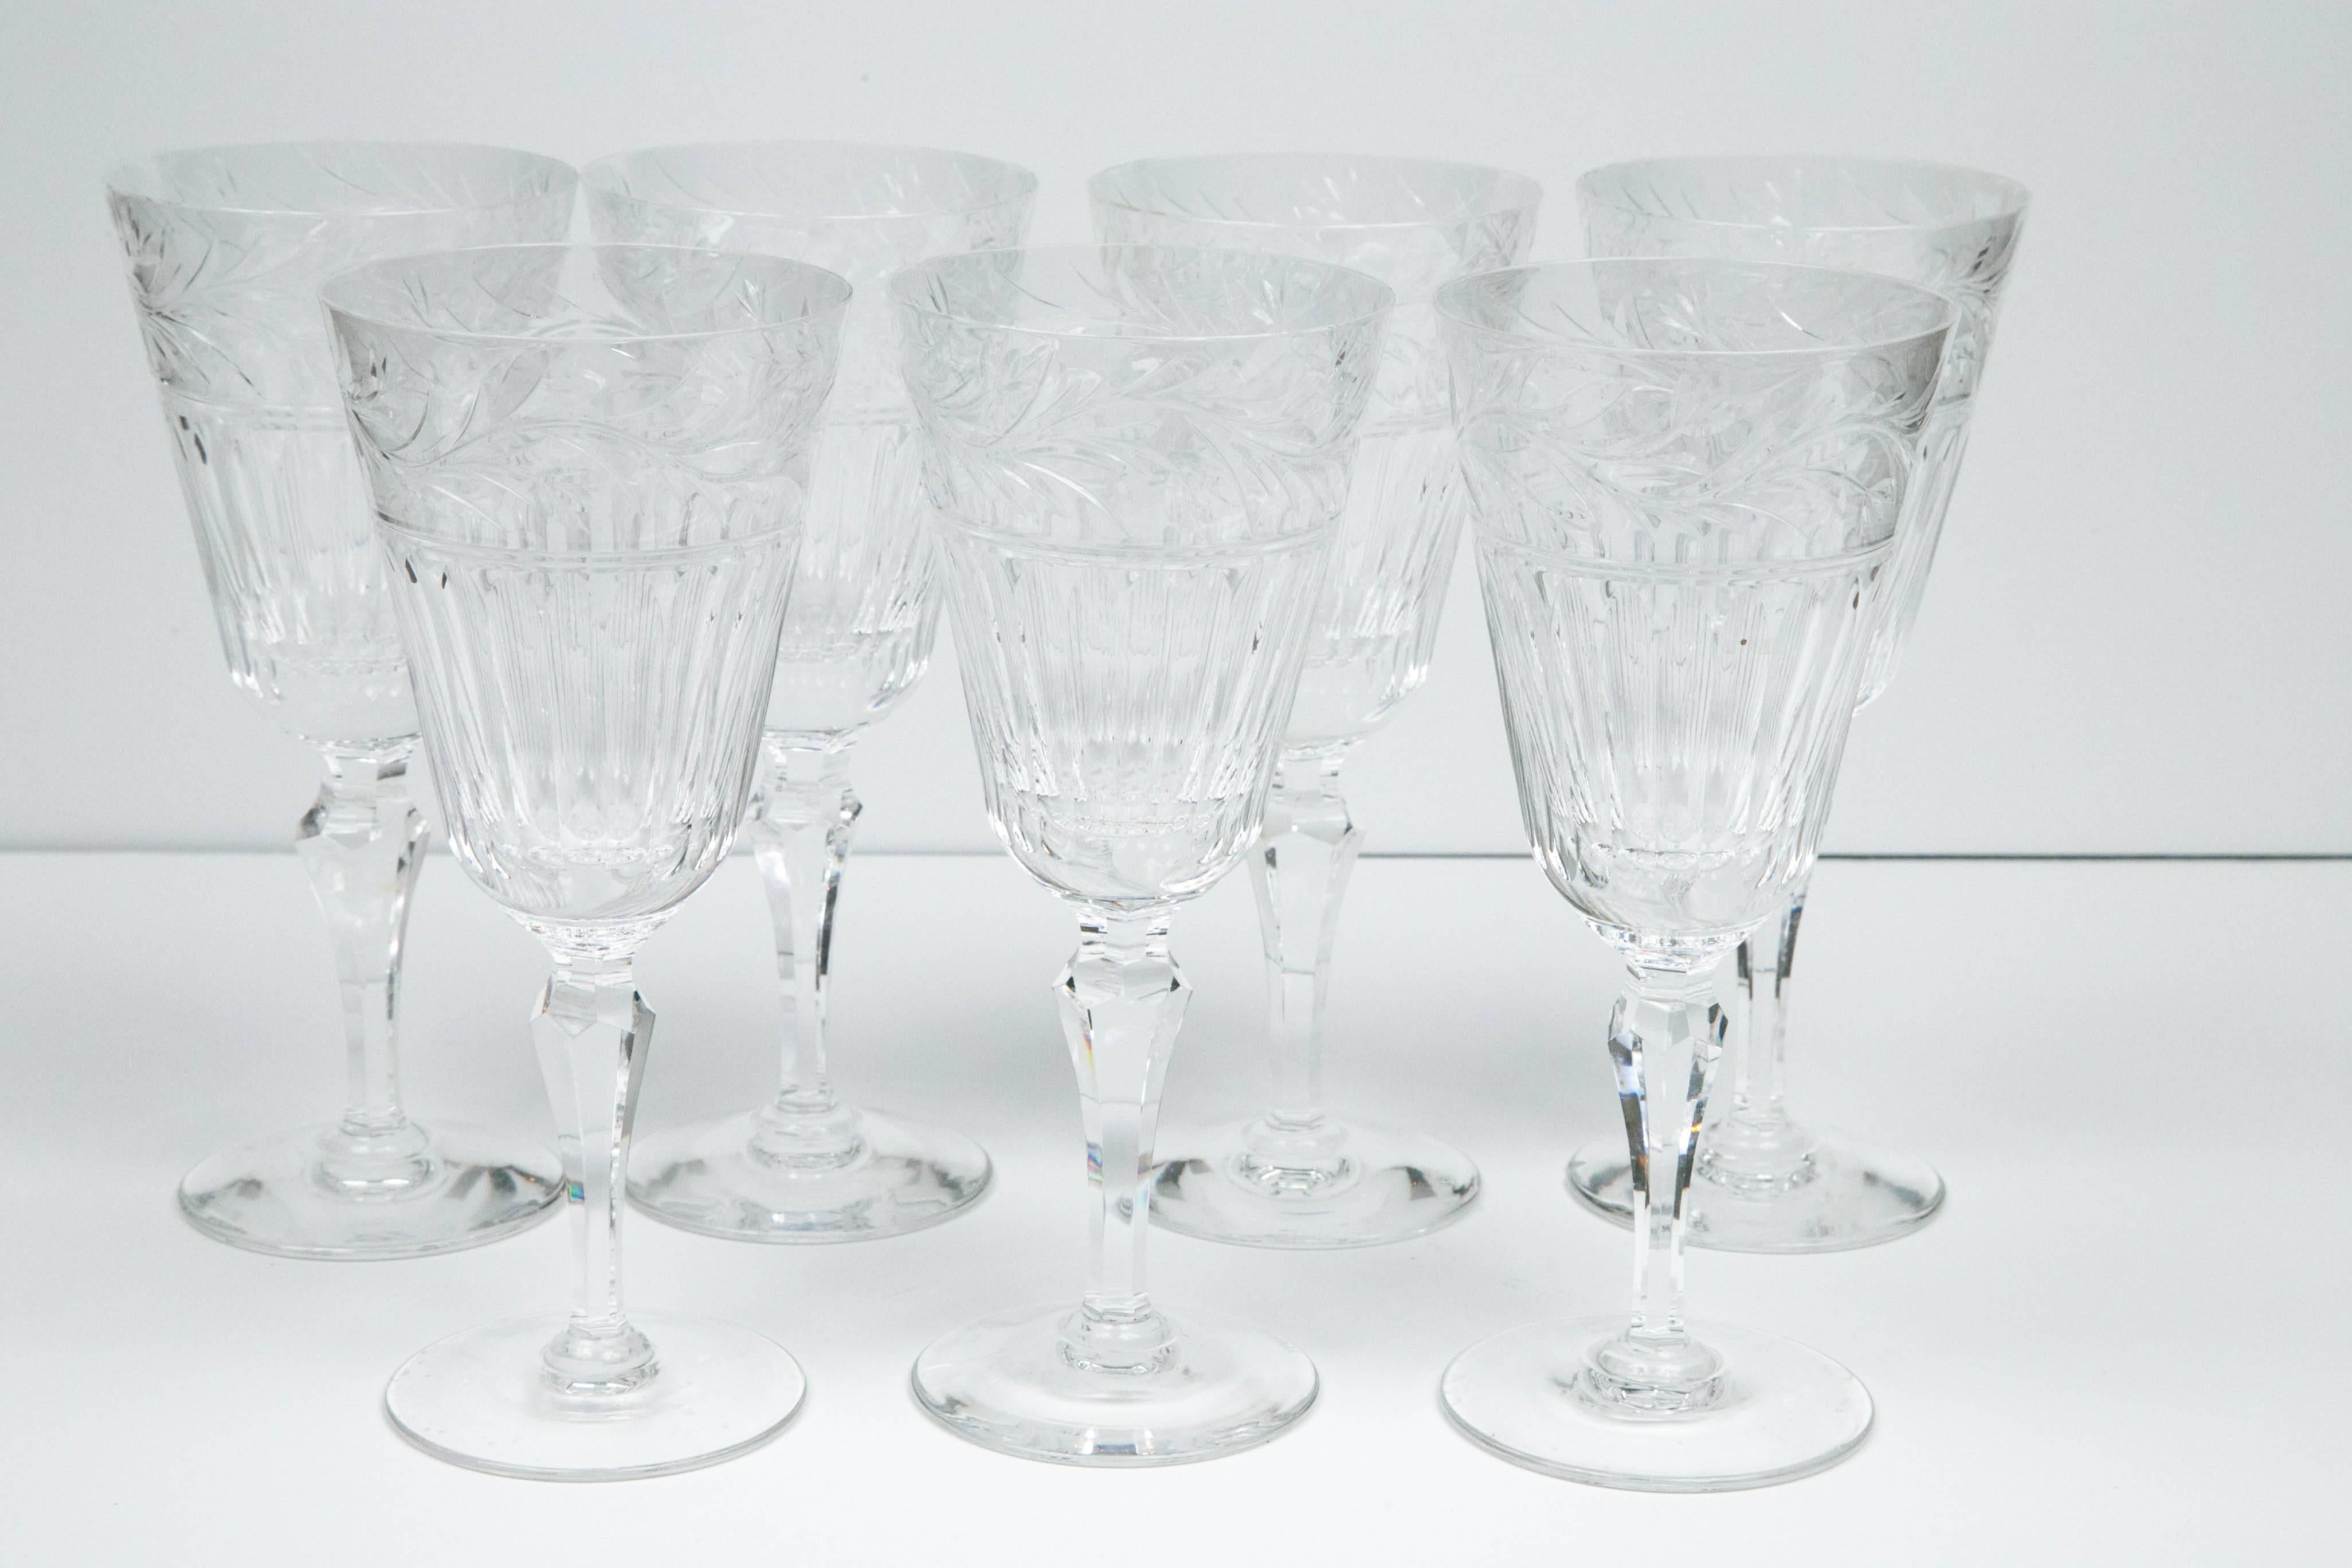 A set of seven crystal glasses by Asprey. Featuring cut crystal with a leaf pattern encircling the rim.